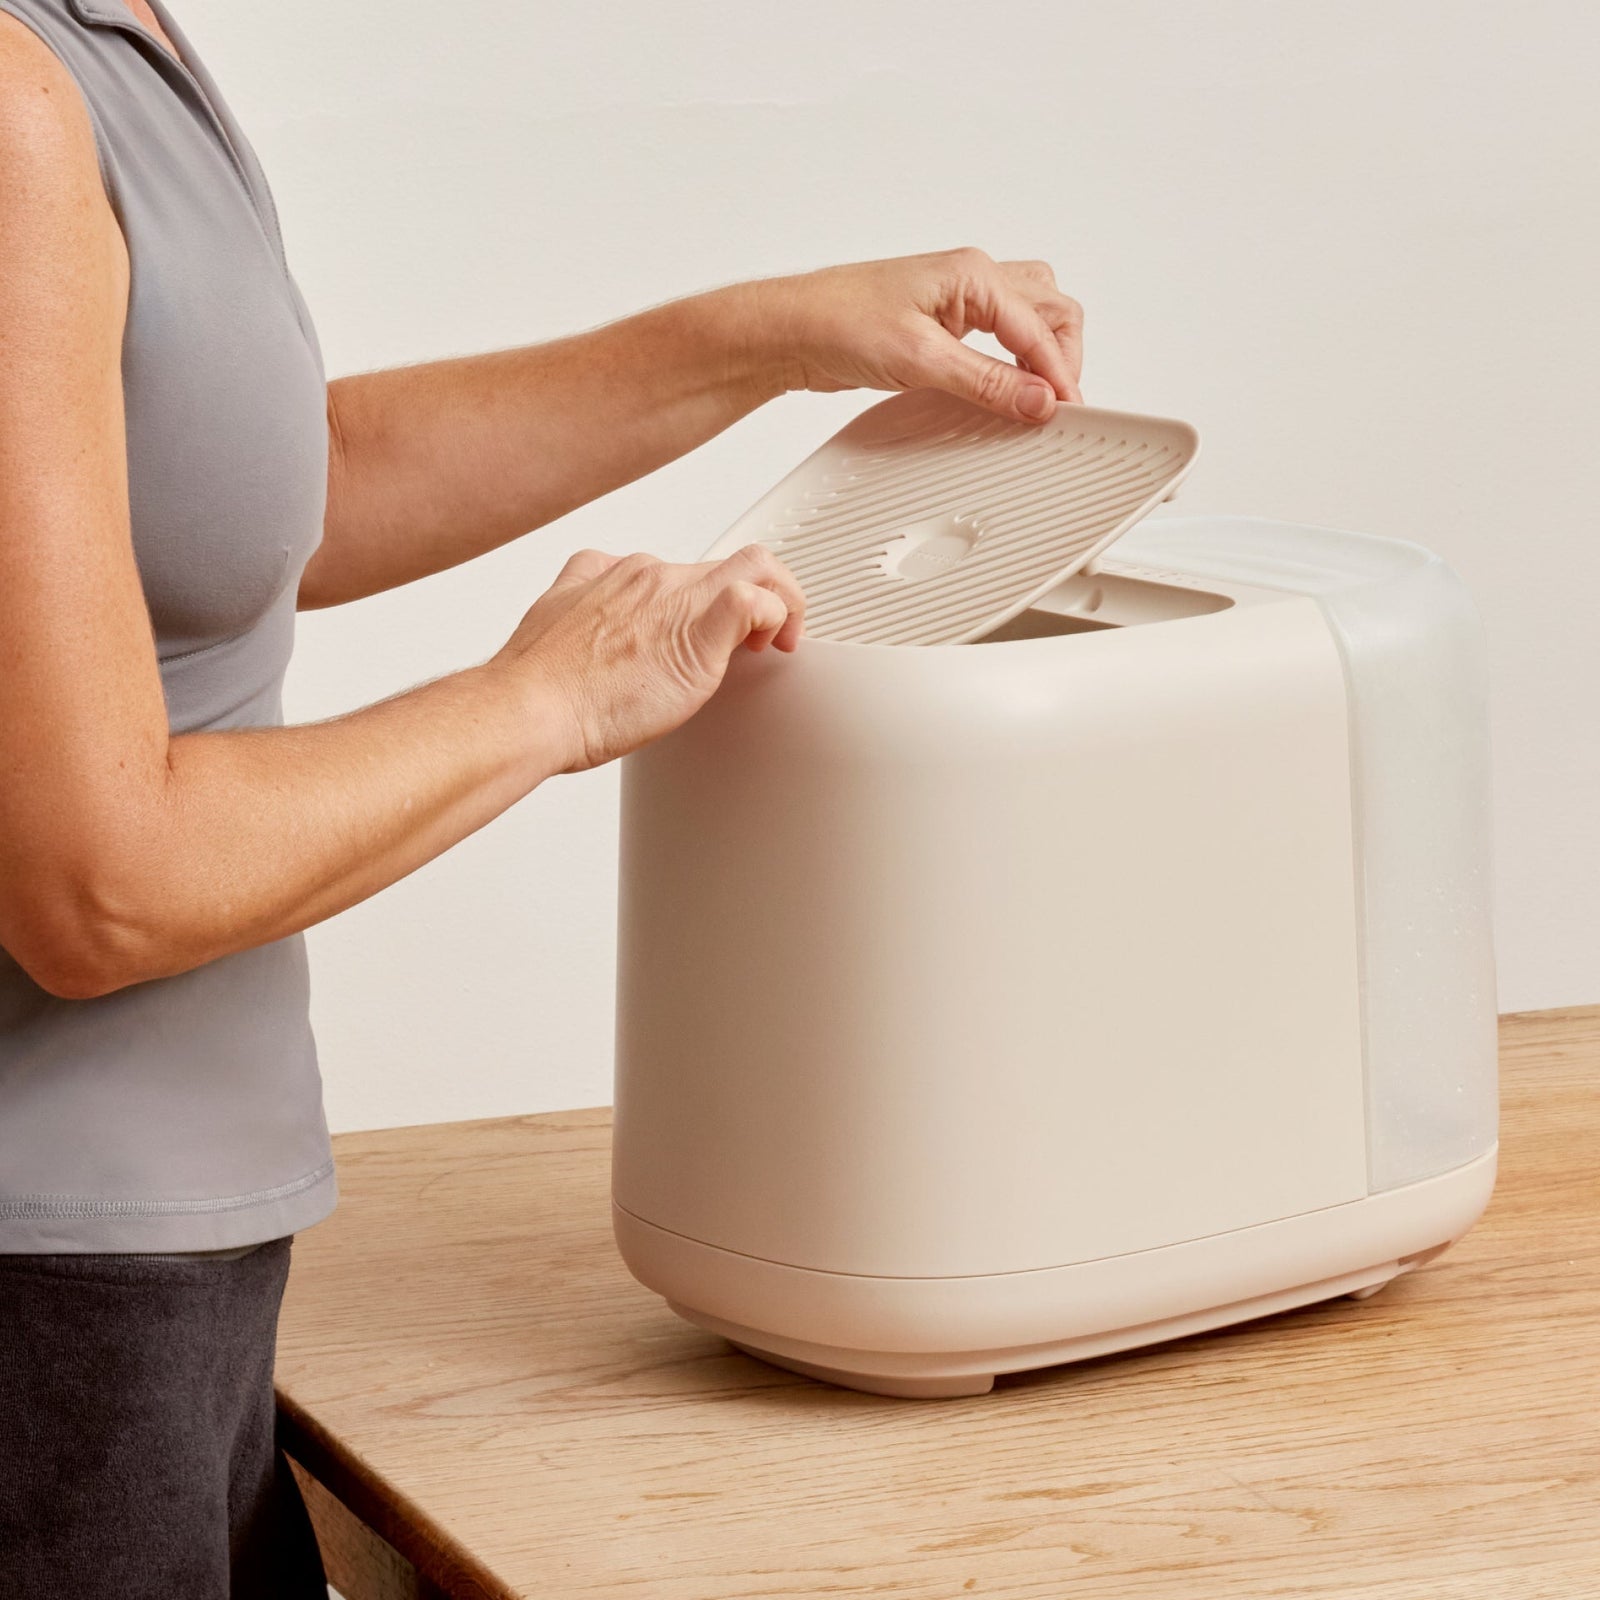 Humidifier Plus | Lifestyle, Woman lifting the grate off the device